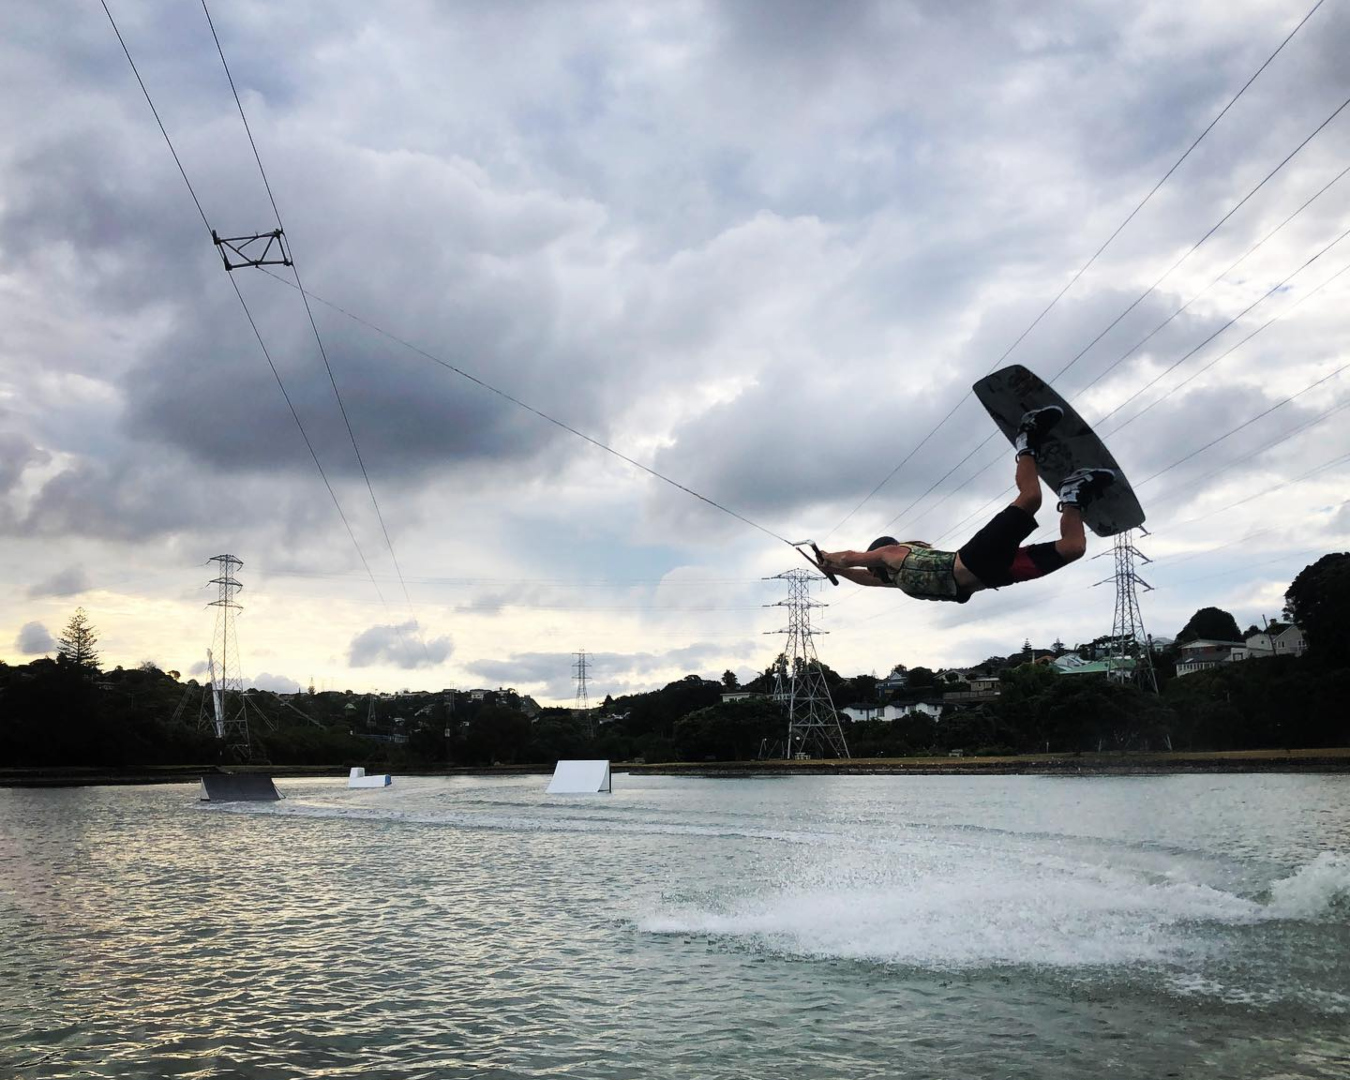 A person catches some air over Onehunga Bay Lagoon using the revolutionary Rixen cable wakeboarding system. 